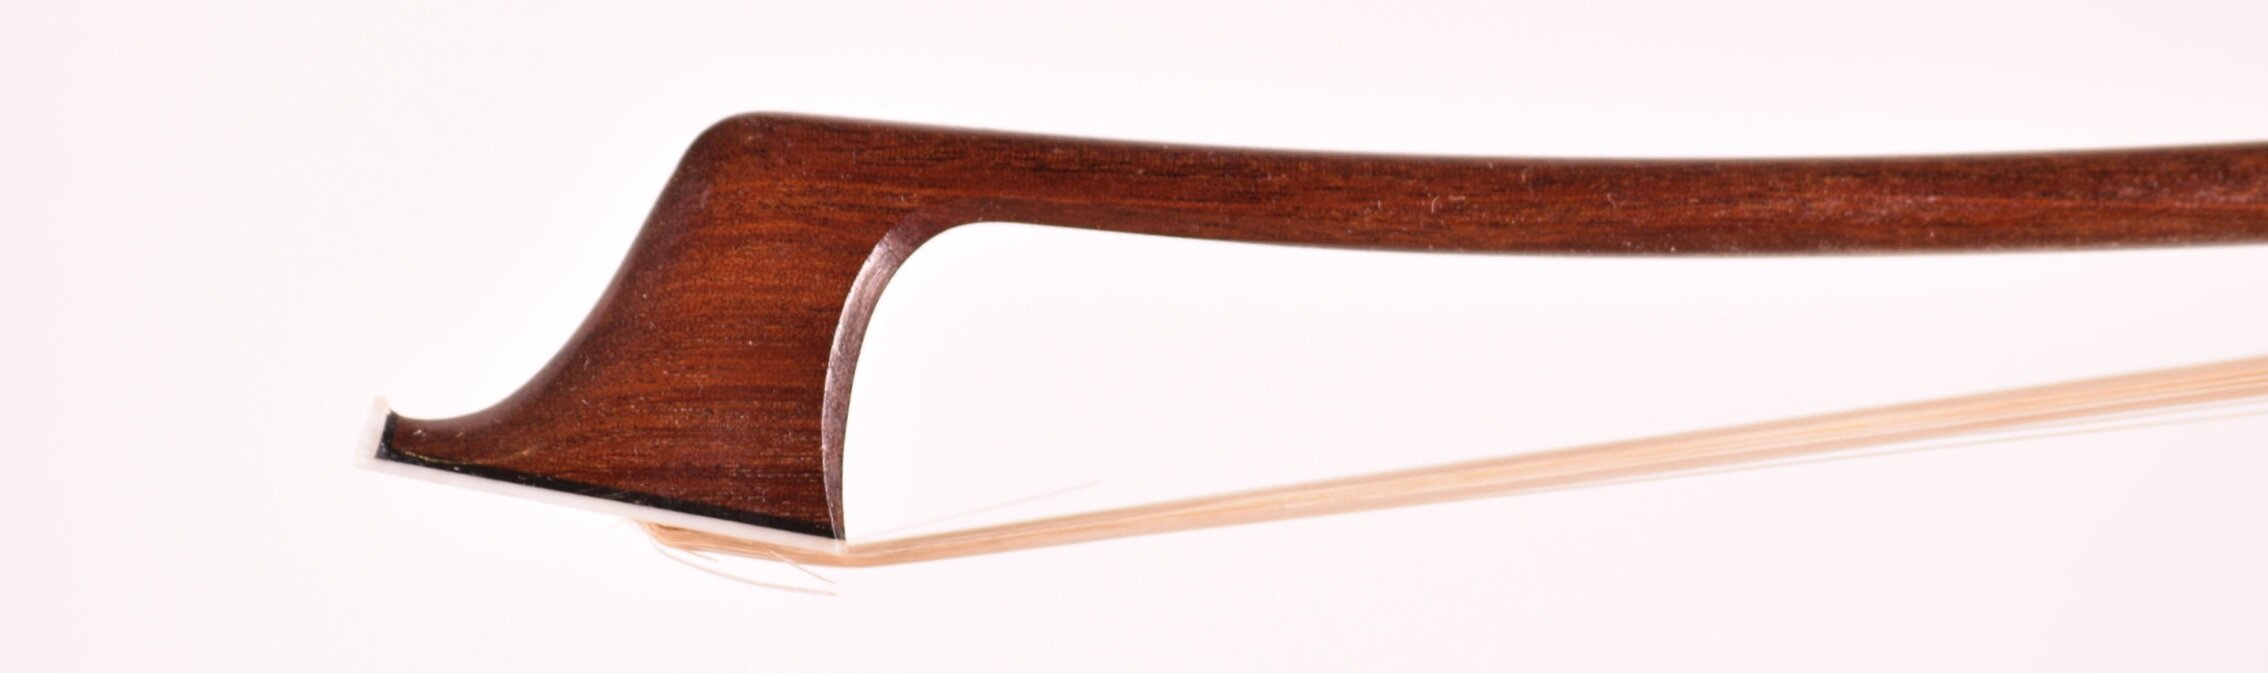 Cello bow by Pierre Guillaume